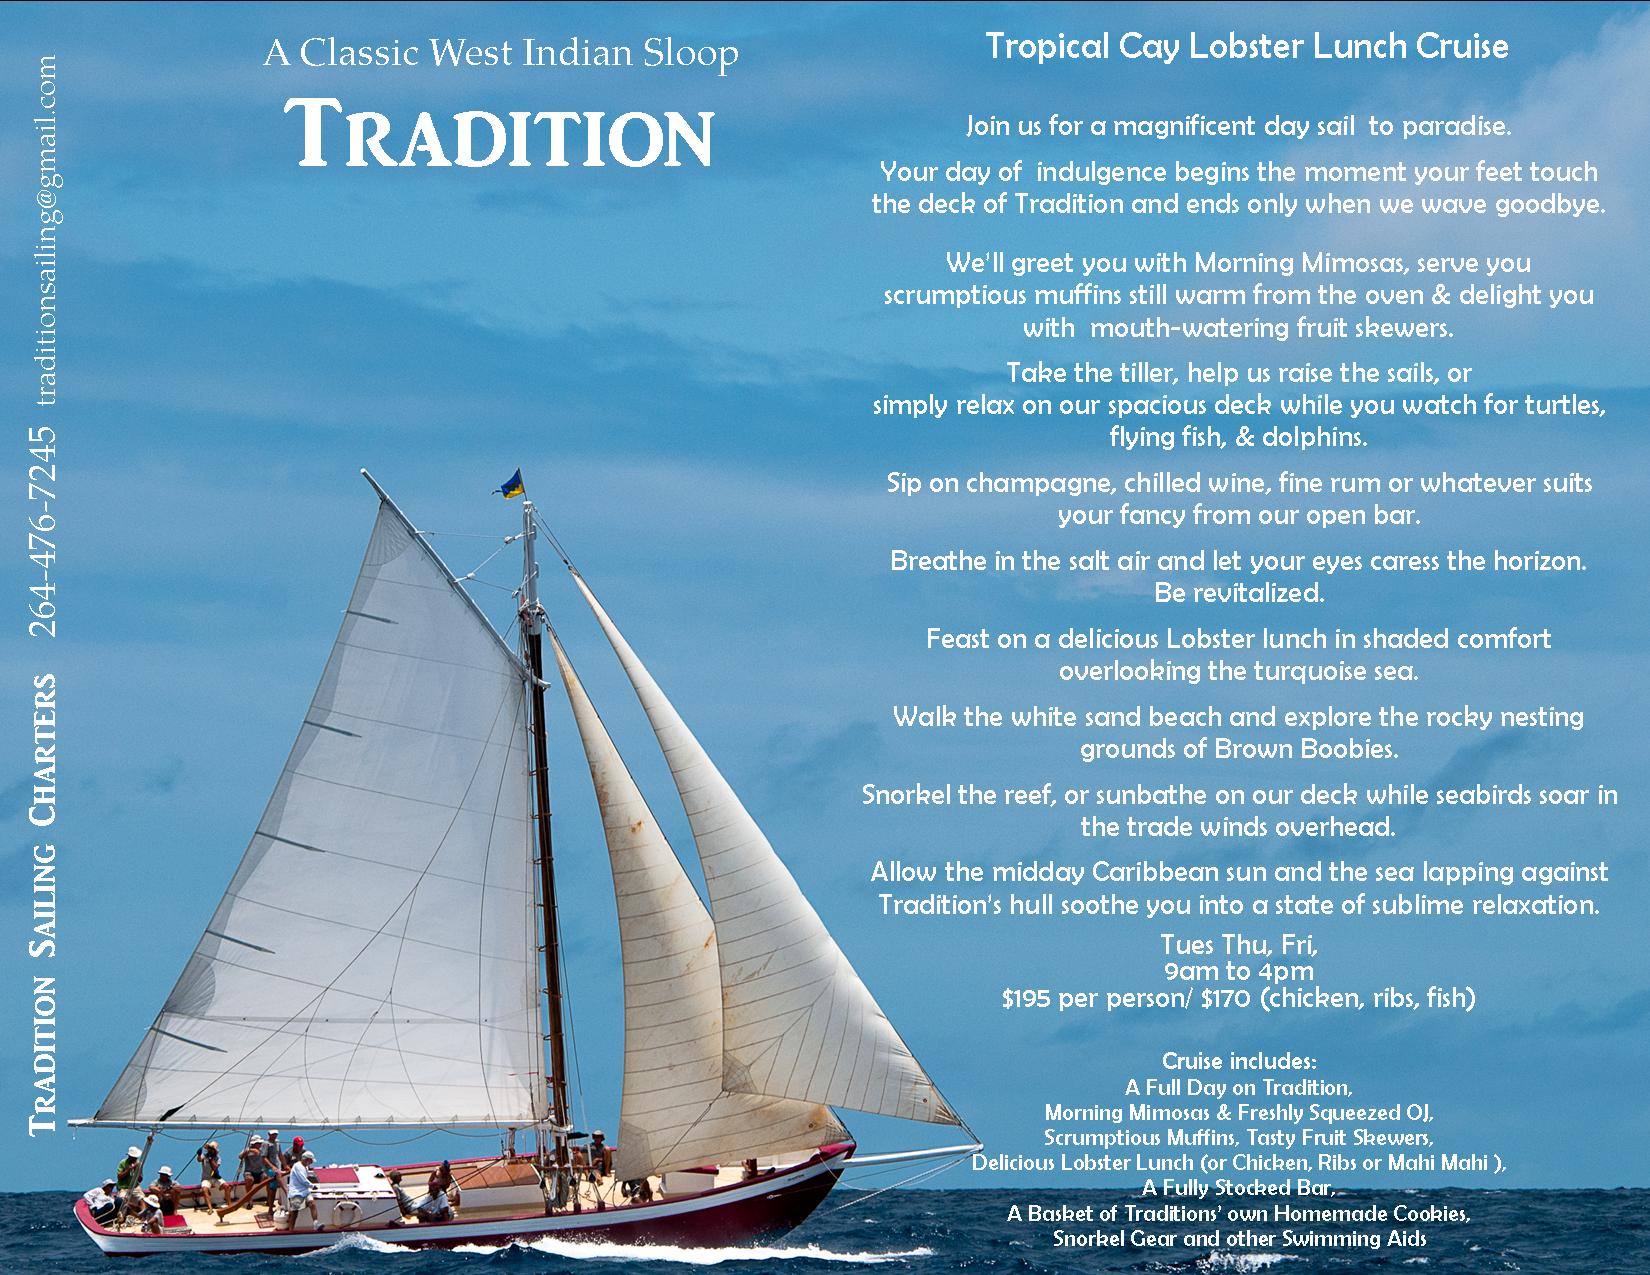 Tradition's Tropical Lobster Lunch Cruise, click for full-size